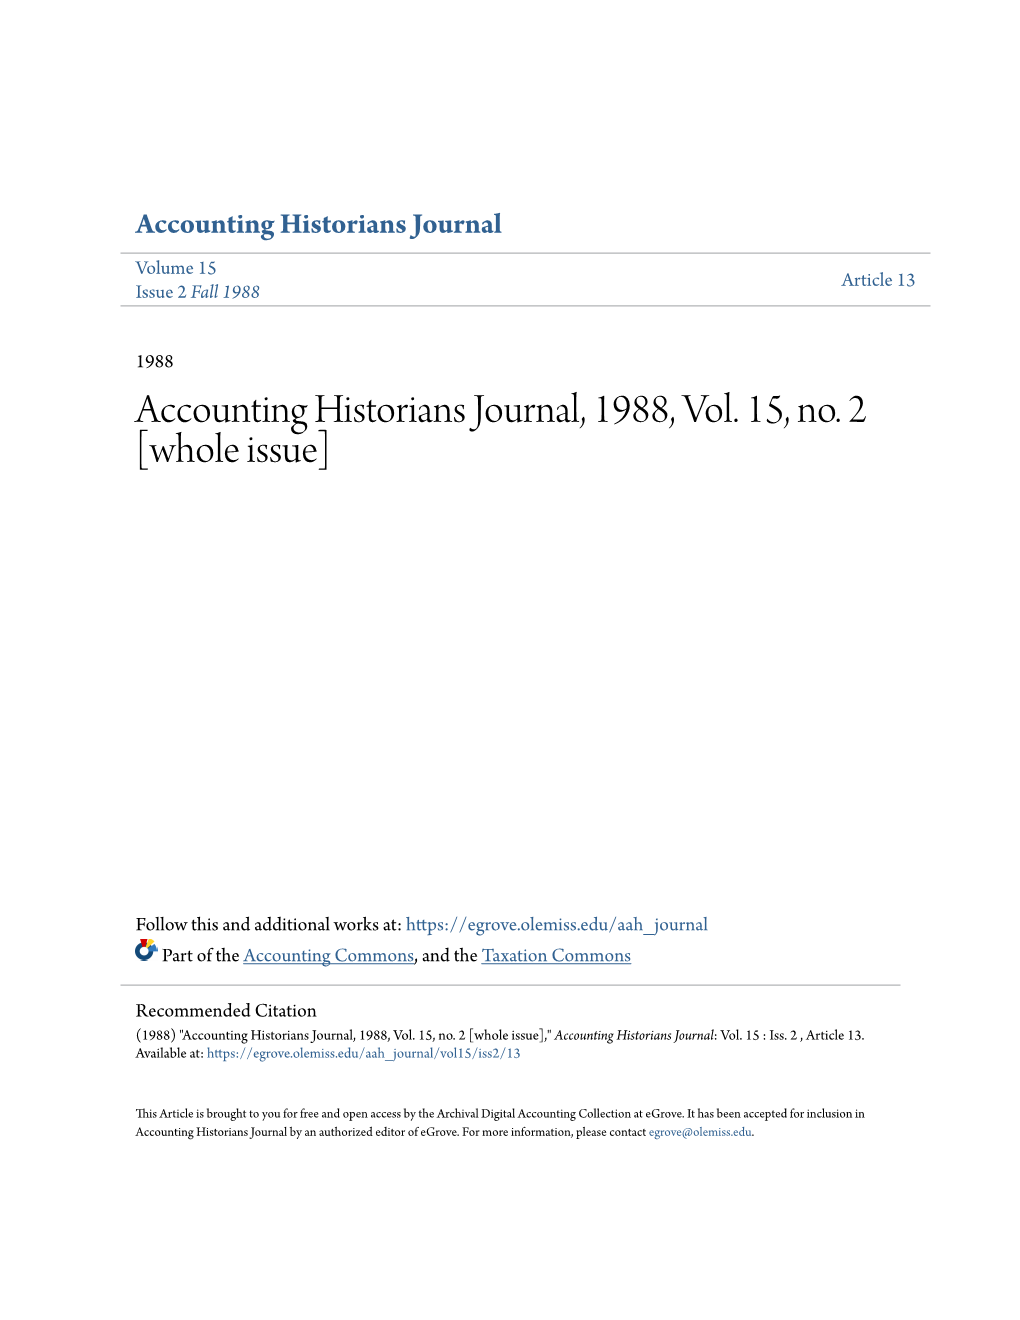 Accounting Historians Journal, 1988, Vol. 15, No. 2 [Whole Issue]